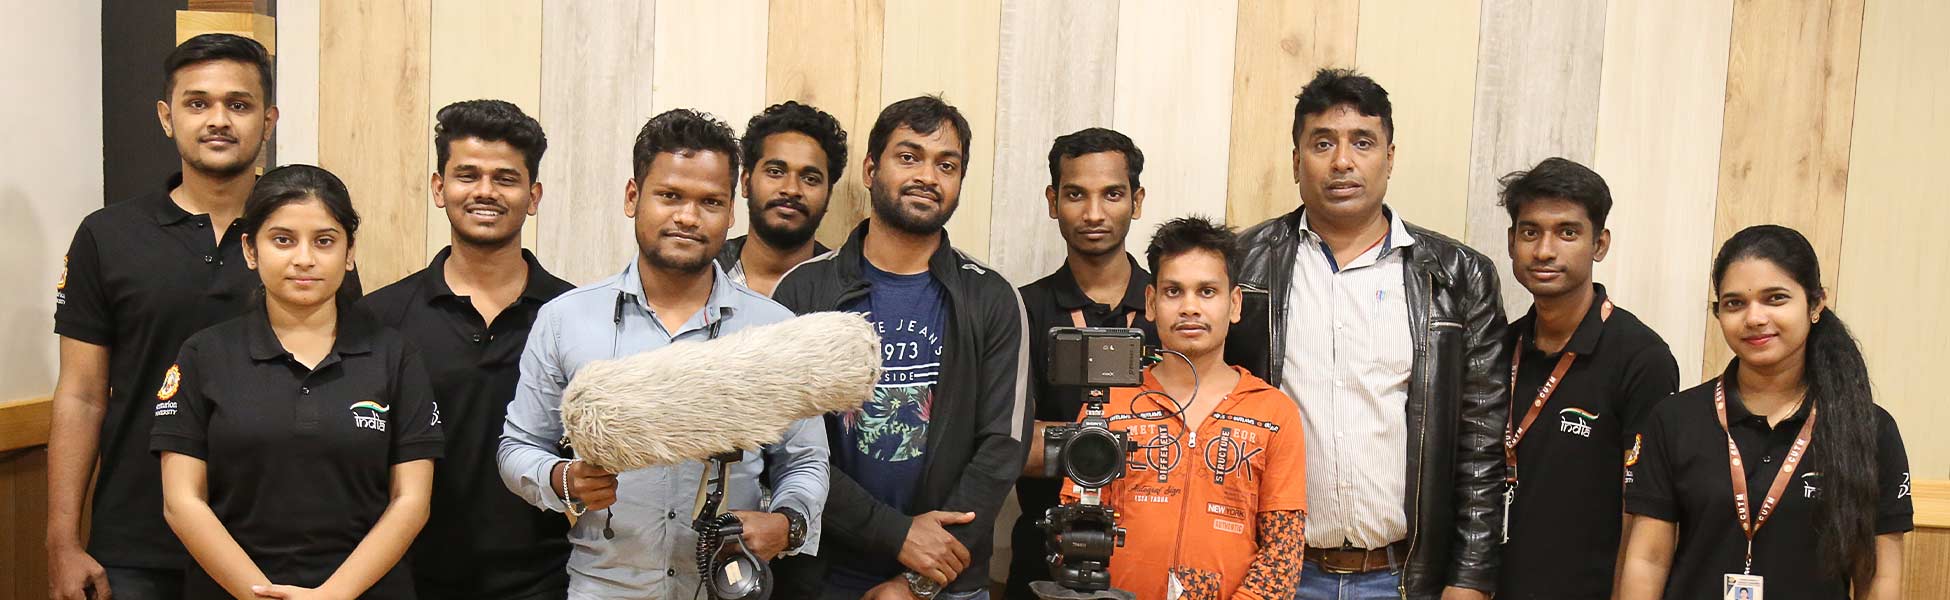 documentary film consultancy services in india, documentary film consultancy services in punjab, documentary film consultancy services in chandigarh, documentary film consultancy services in uttarakhand, documentary video consultancy services in india, documentary video consultancy services in punjab, documentary video consultancy services in chandigarh, documentay video consultancy services in uttarakhand, tv documentary consultancy services in india, tv documentary consultancy services in punjab, tv documentary consultancy services in chandigarh, tv documentary consultancy services in uttarakhand, documentary consultancy services in india, documentary consultancy services in punjab, documentary consultancy services in chandigarh, documentary consultancy services in uttarakhand